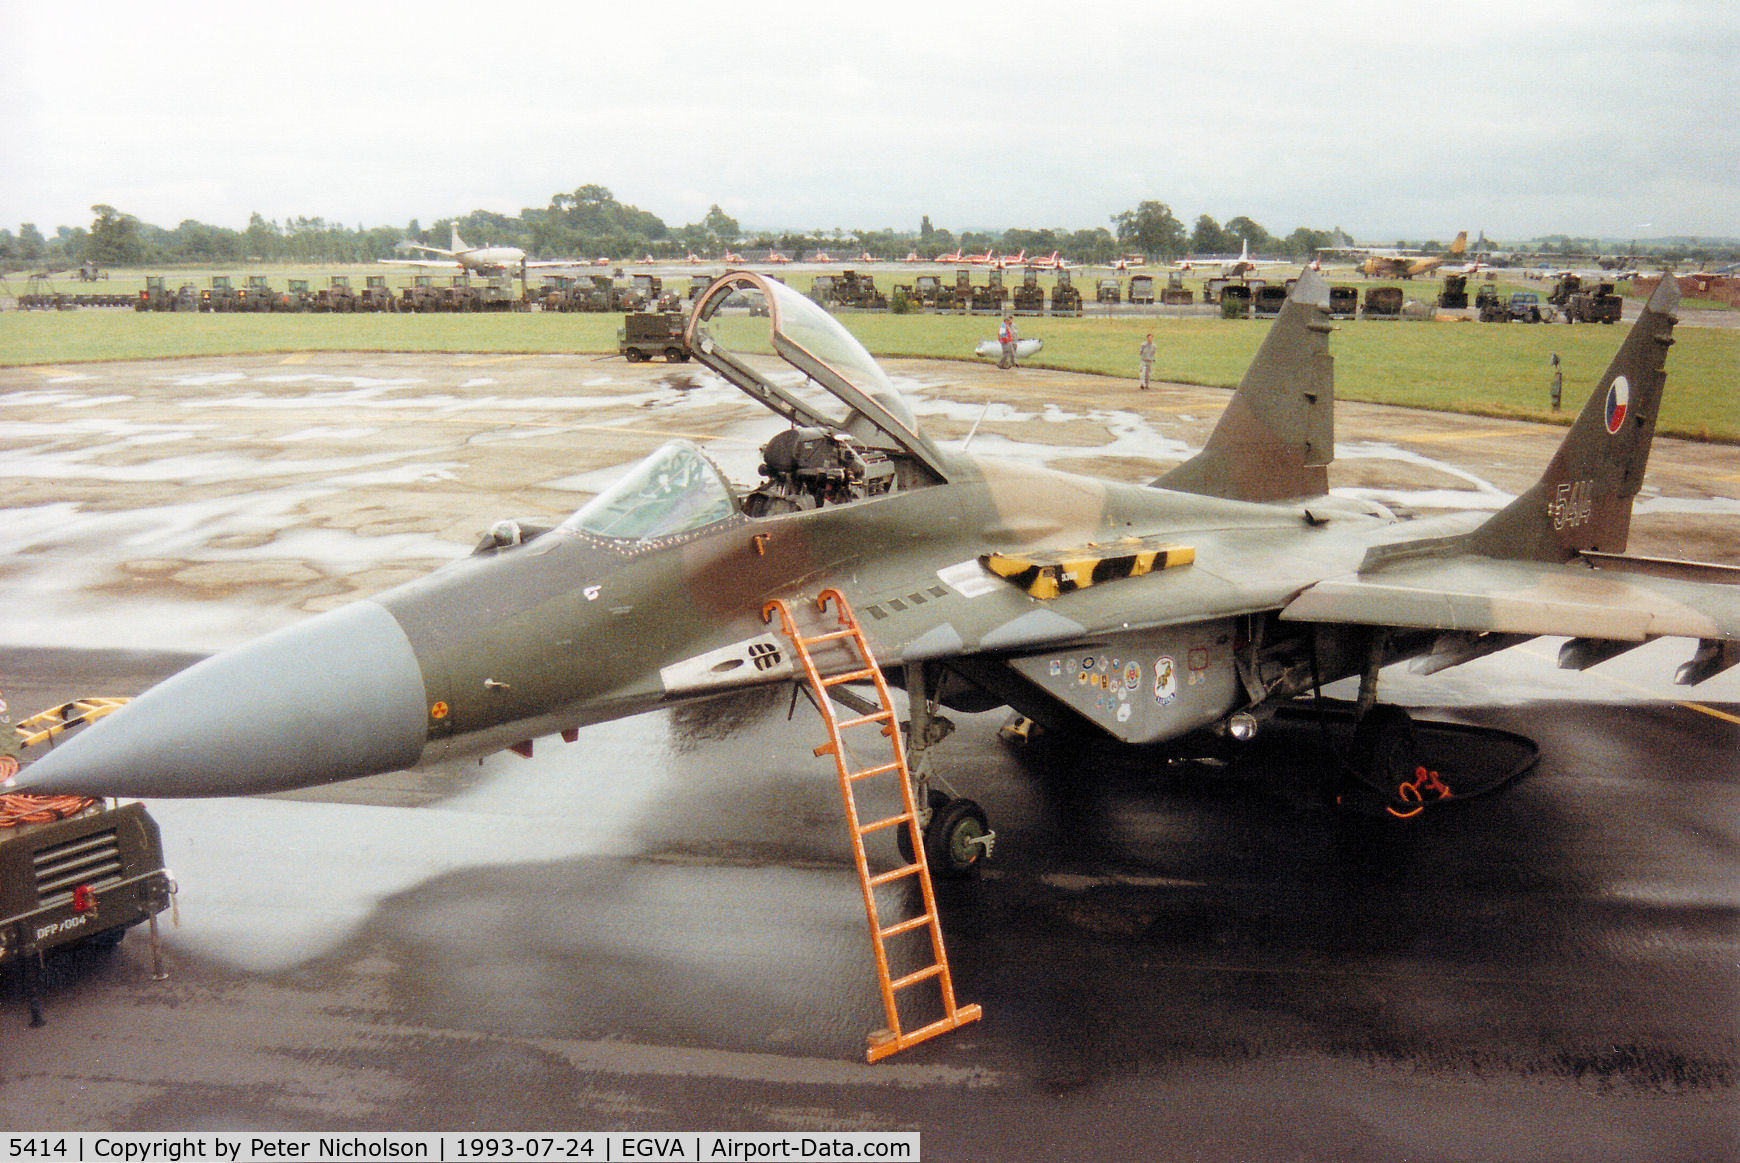 5414, Mikoyan-Gurevich MiG-29 C/N 32354, MiG-29 Fulcrum A of 11 SLP Czech Air Force based at Ceske Budejovice on the flight-line at the 1993 Intnl Air Tattoo at RAF Fairford.